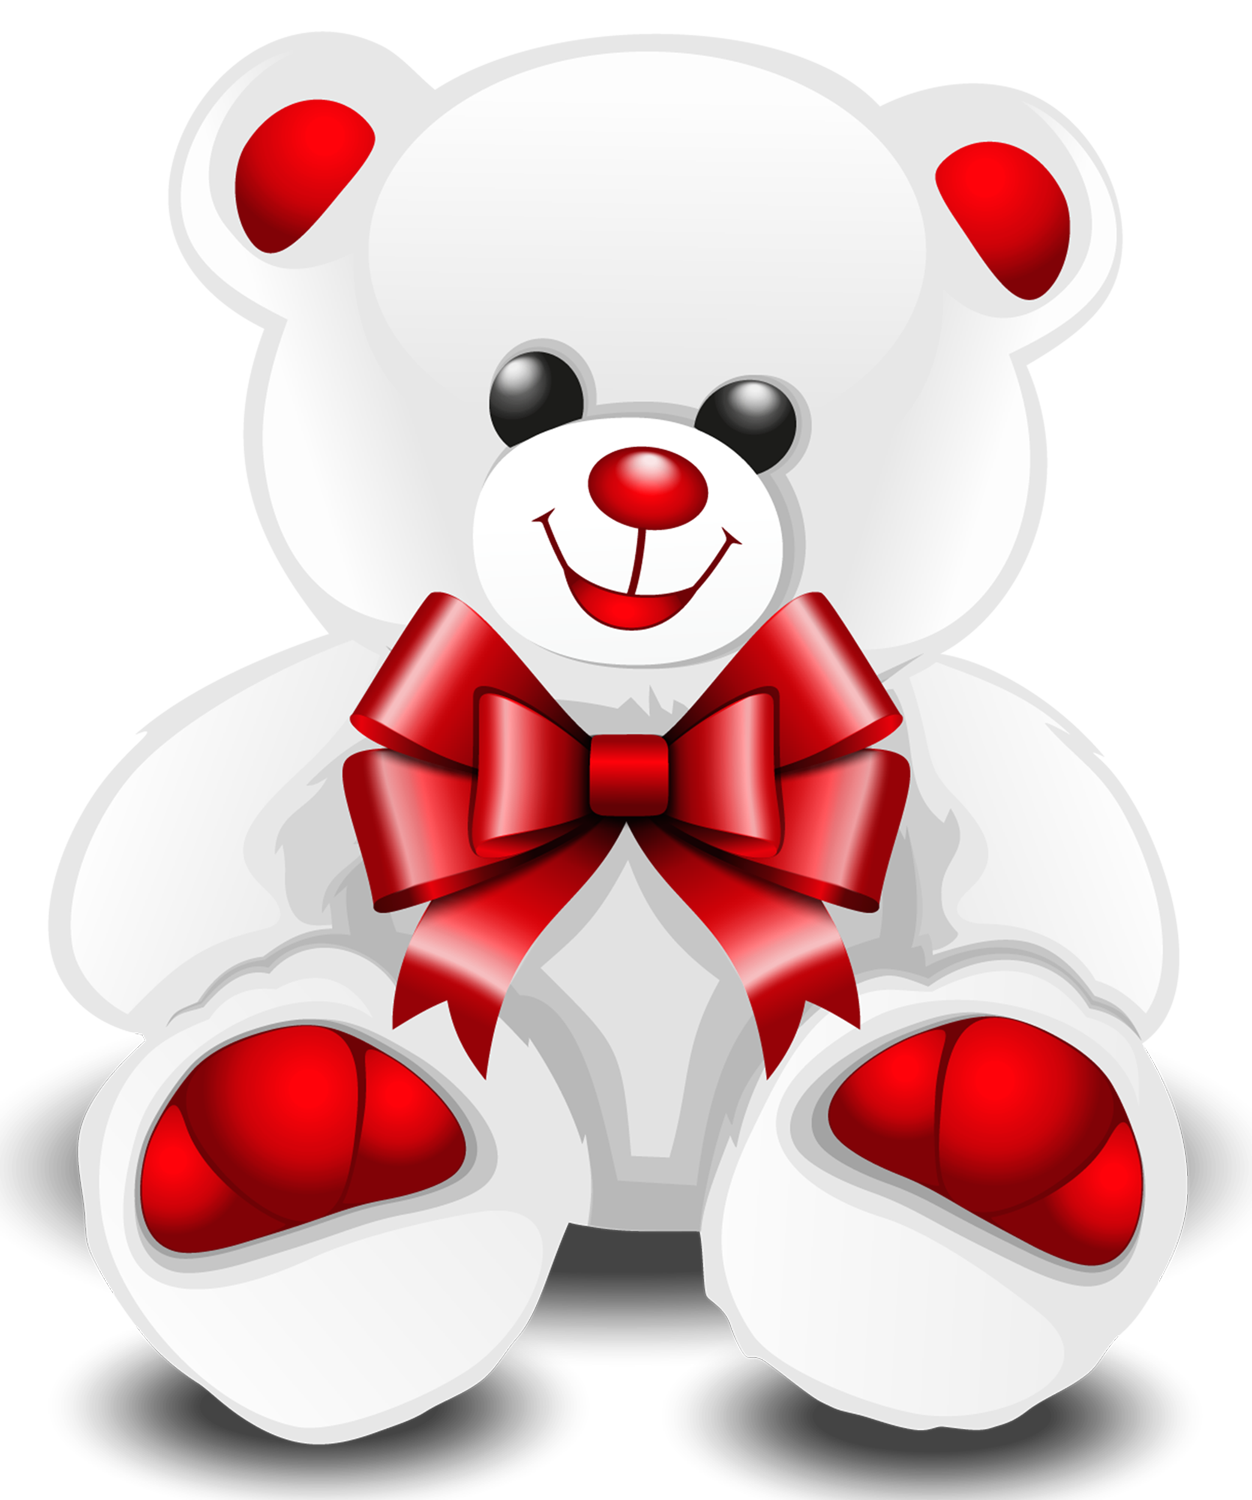 Free Teddy Bear Png Transparent, Download Free Teddy Bear Png ...